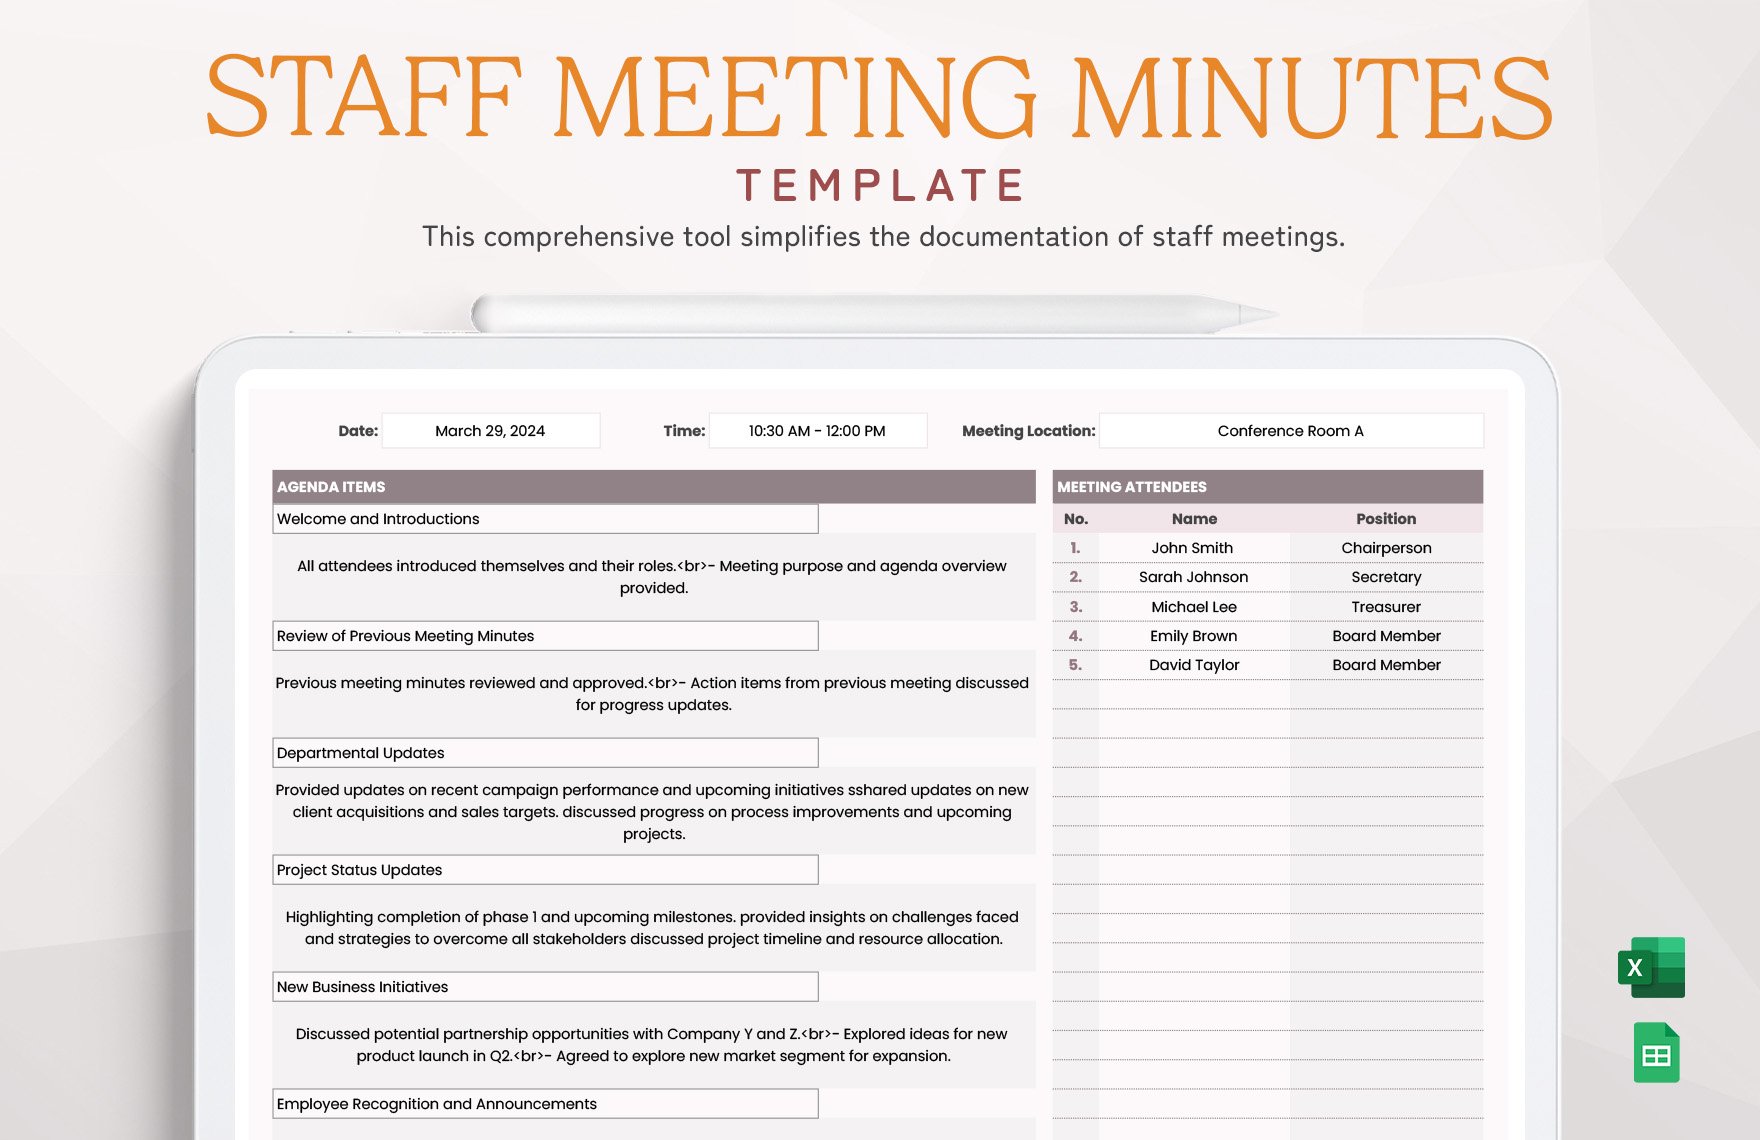 Staff Meeting Minutes Template in Excel, Google Sheets